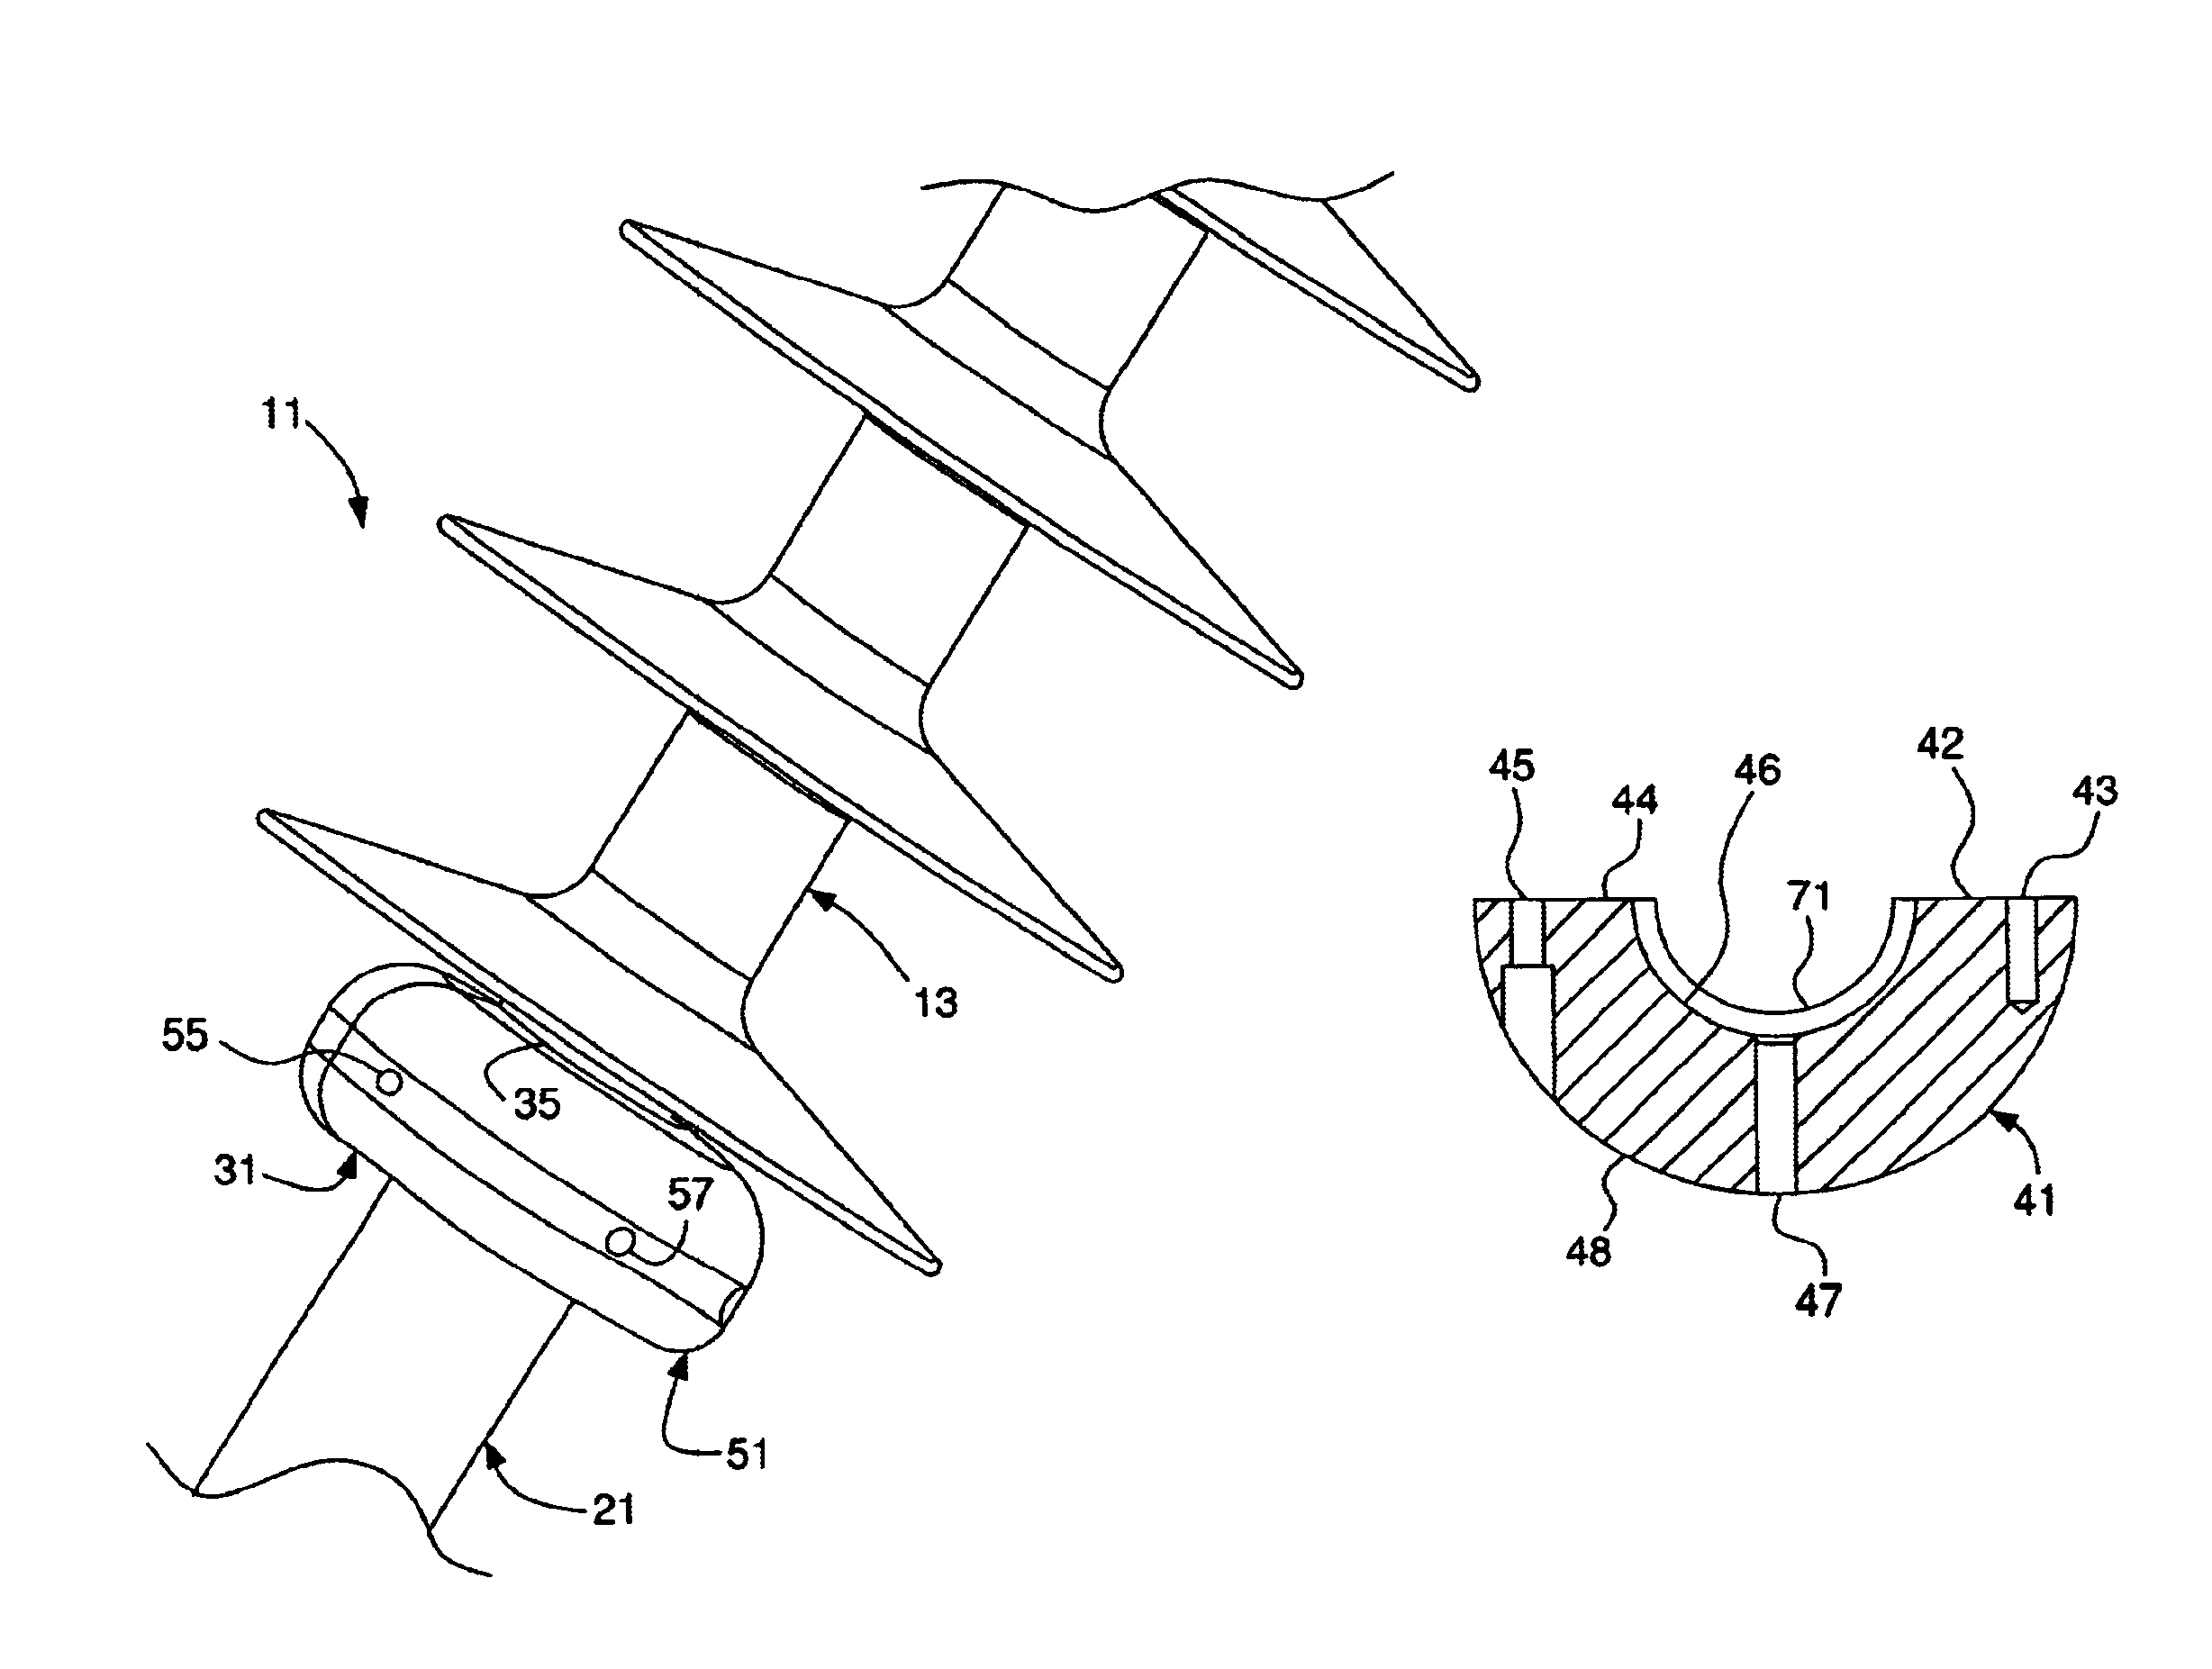 Insulator sealing and shielding collar assembly